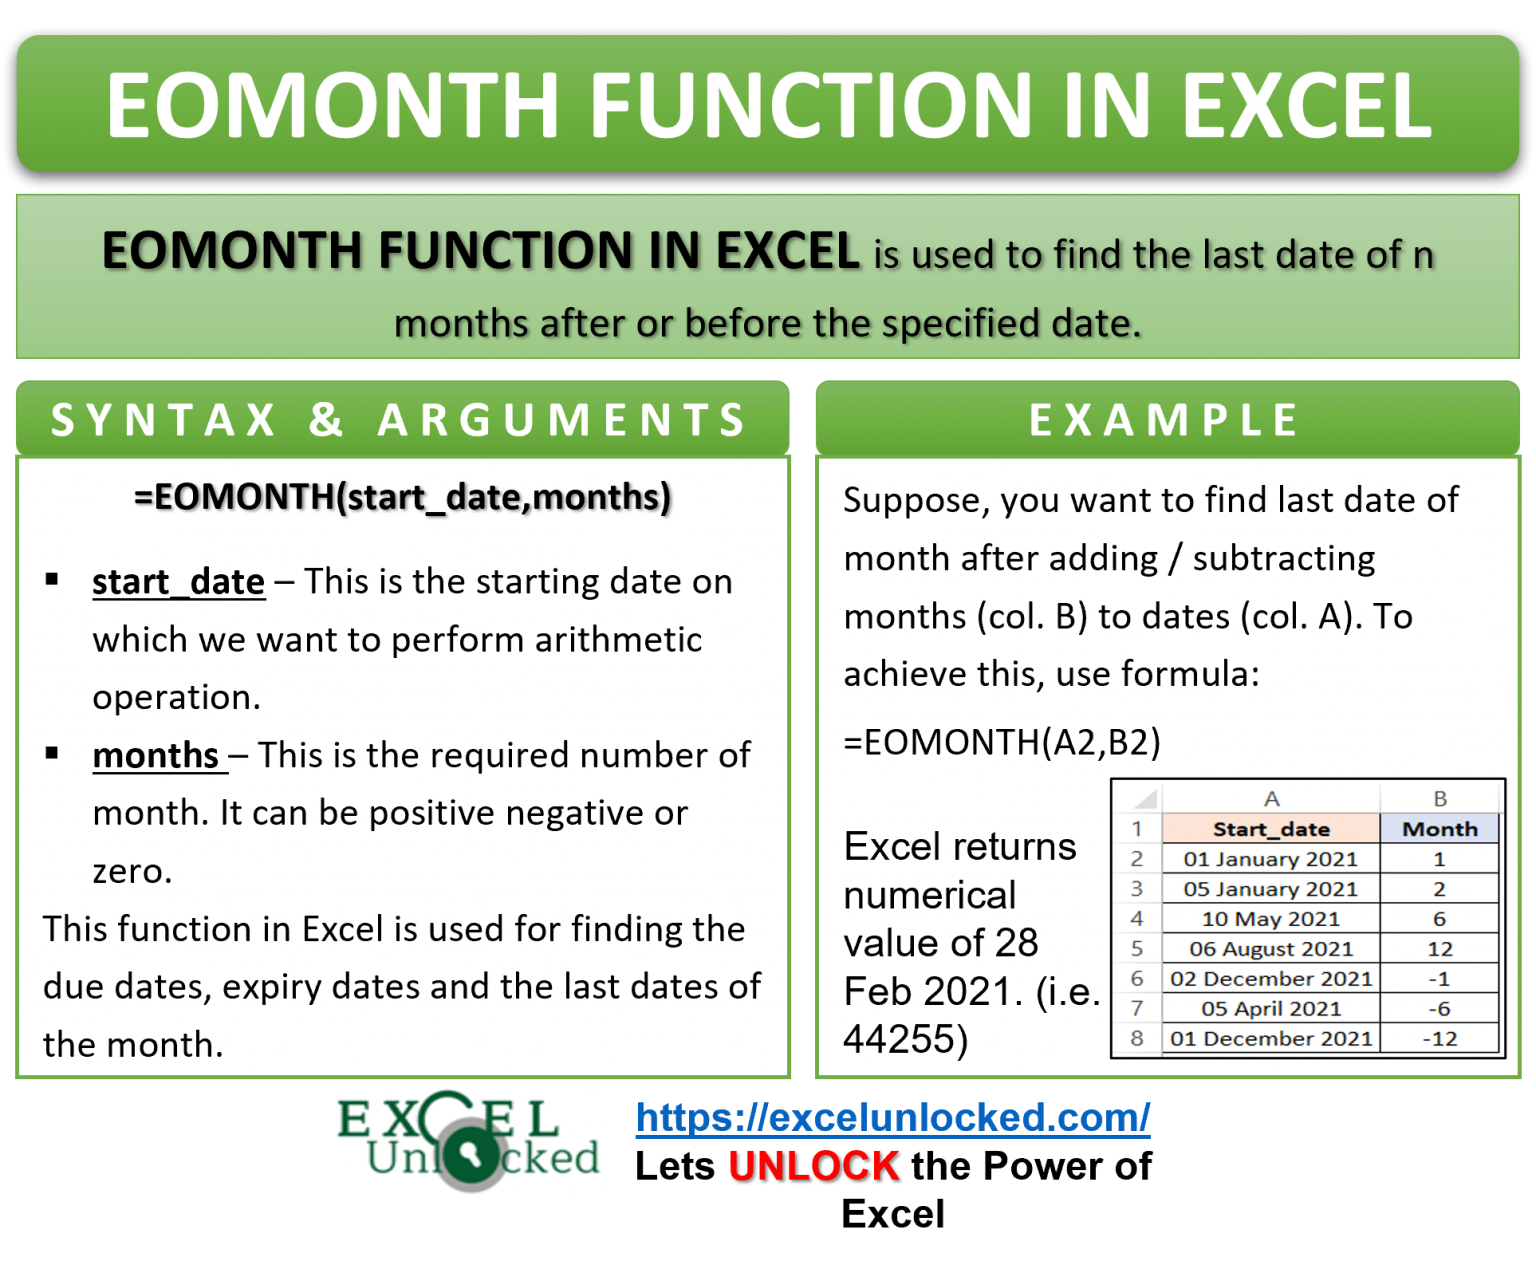 eomonth-function-in-excel-getting-last-day-of-month-excel-unlocked